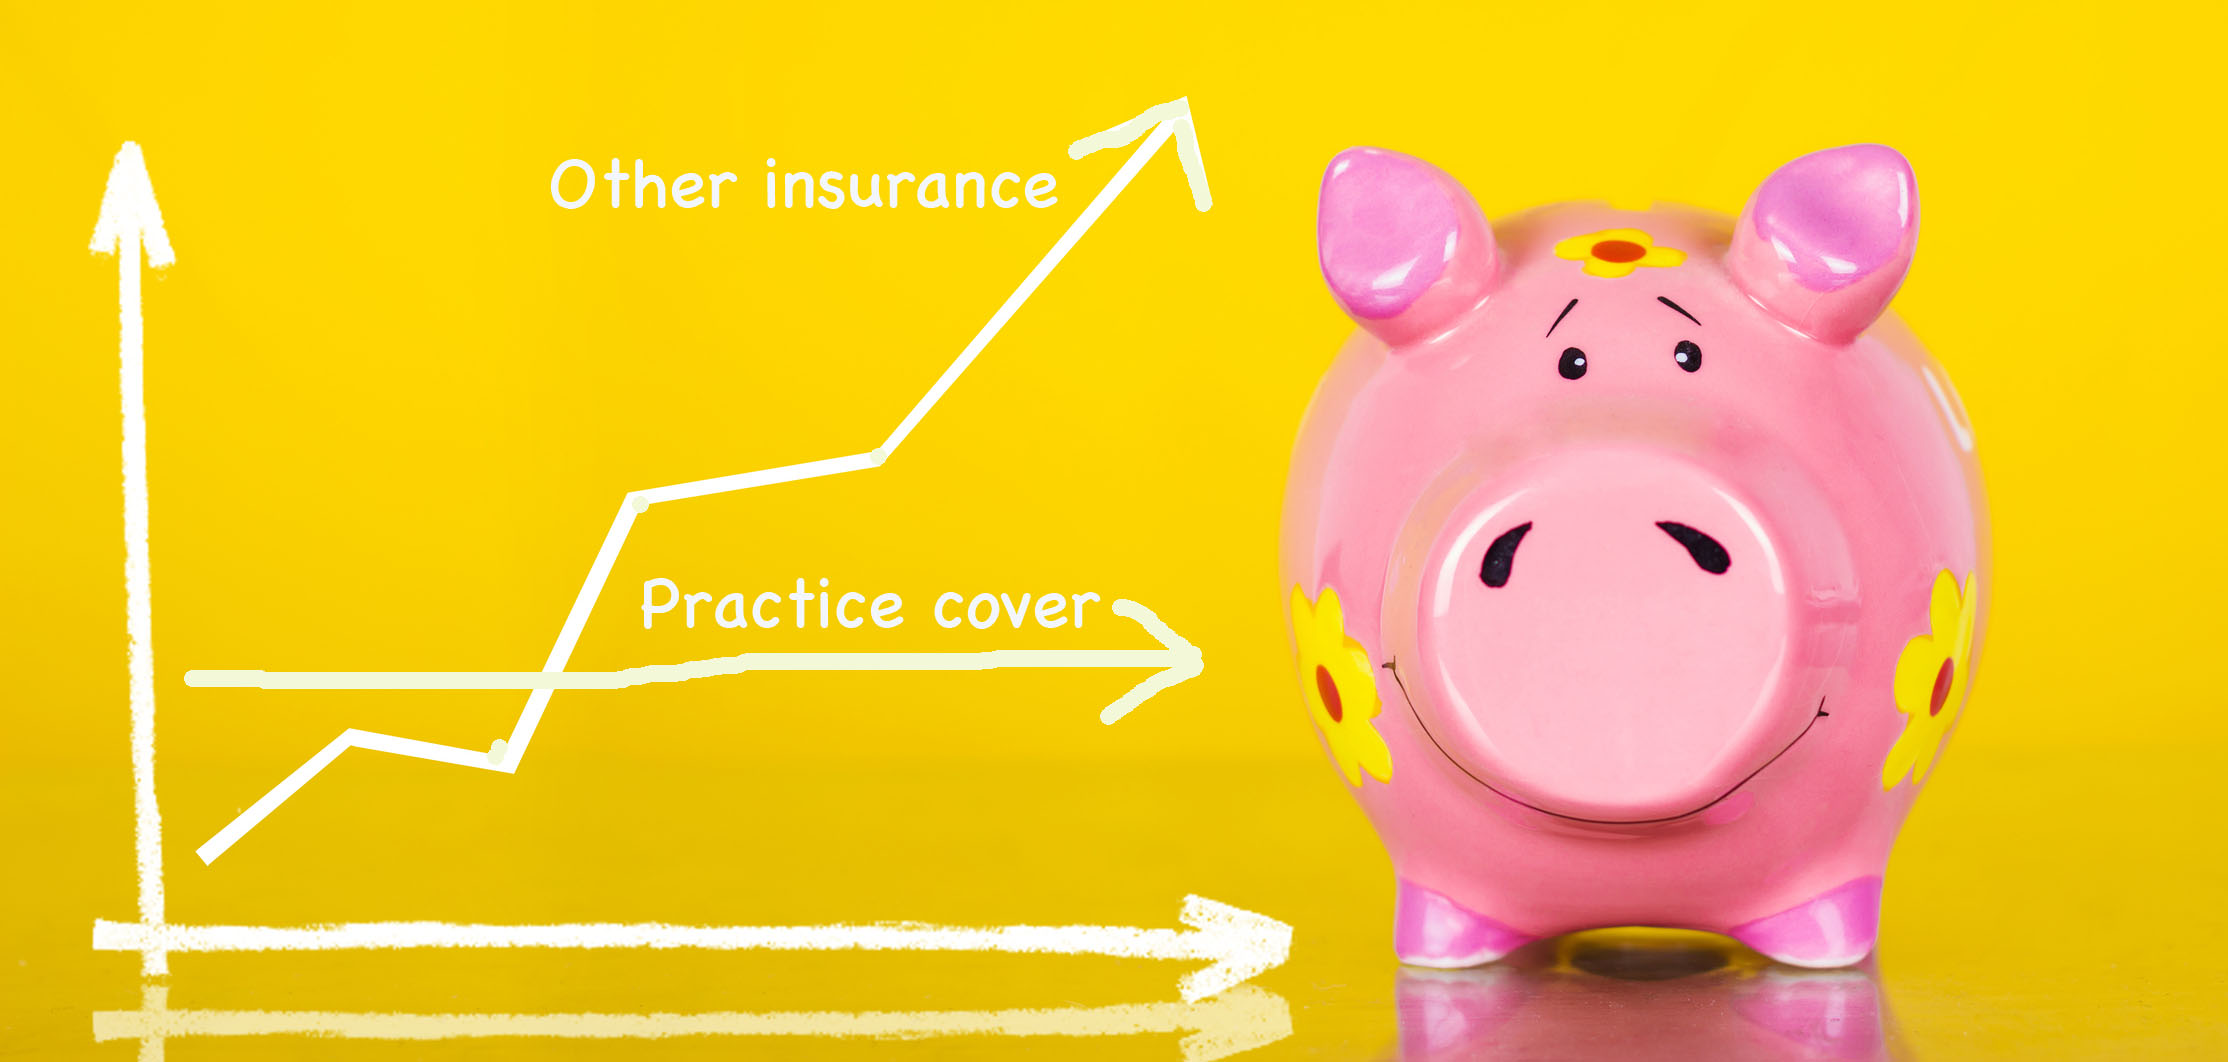 practice cover insurance